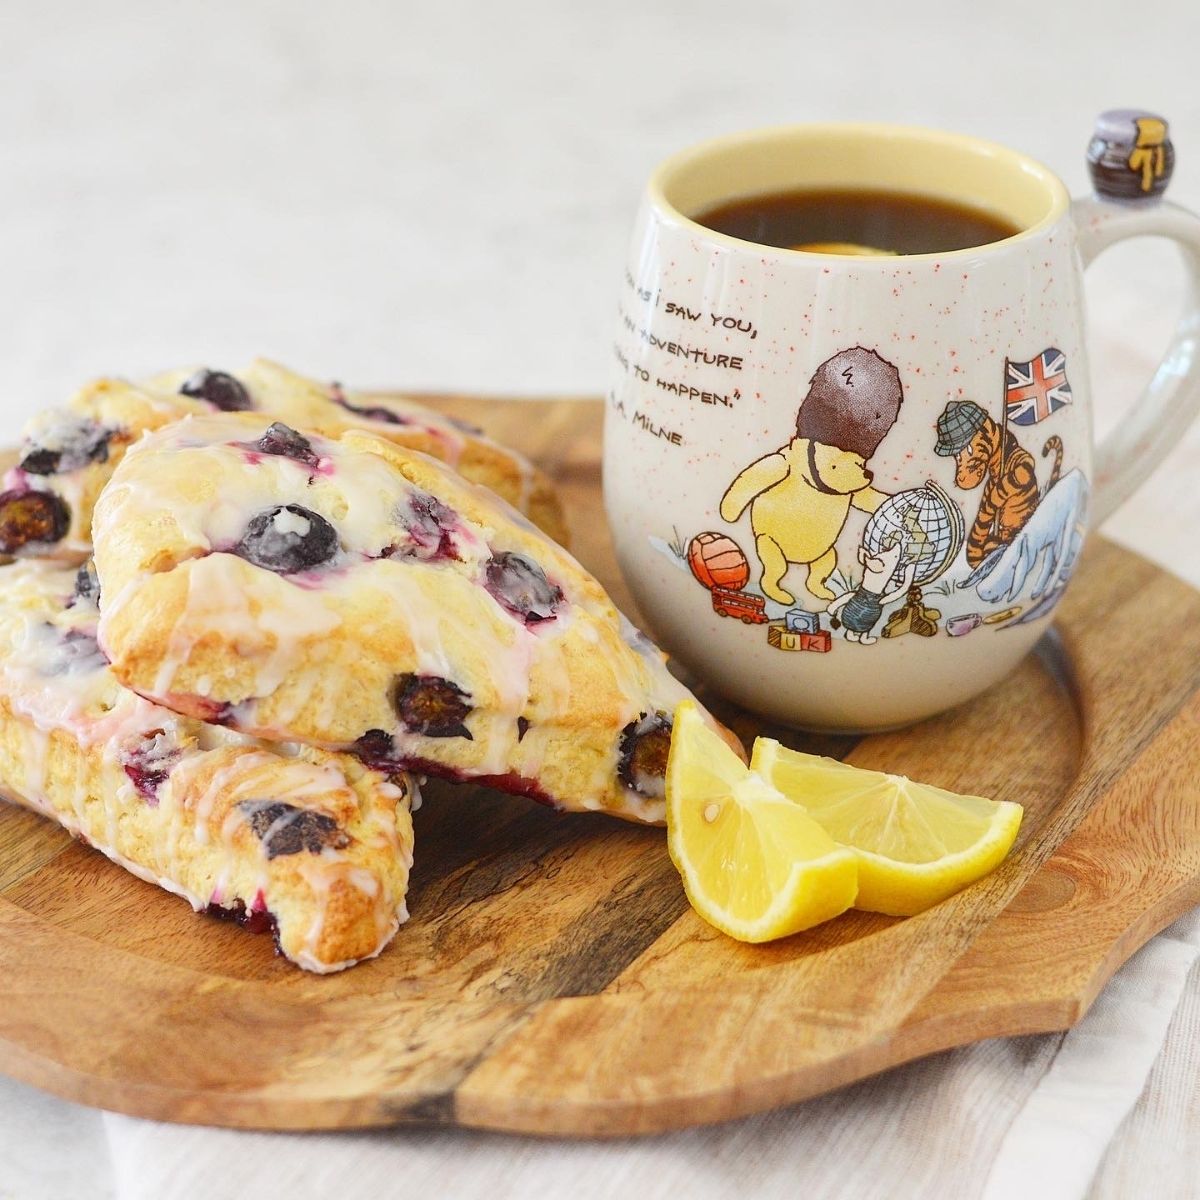 These glazed lemon blueberry scones are filled with fresh blueberries and have a tangy lemon icing drizzled over them.  